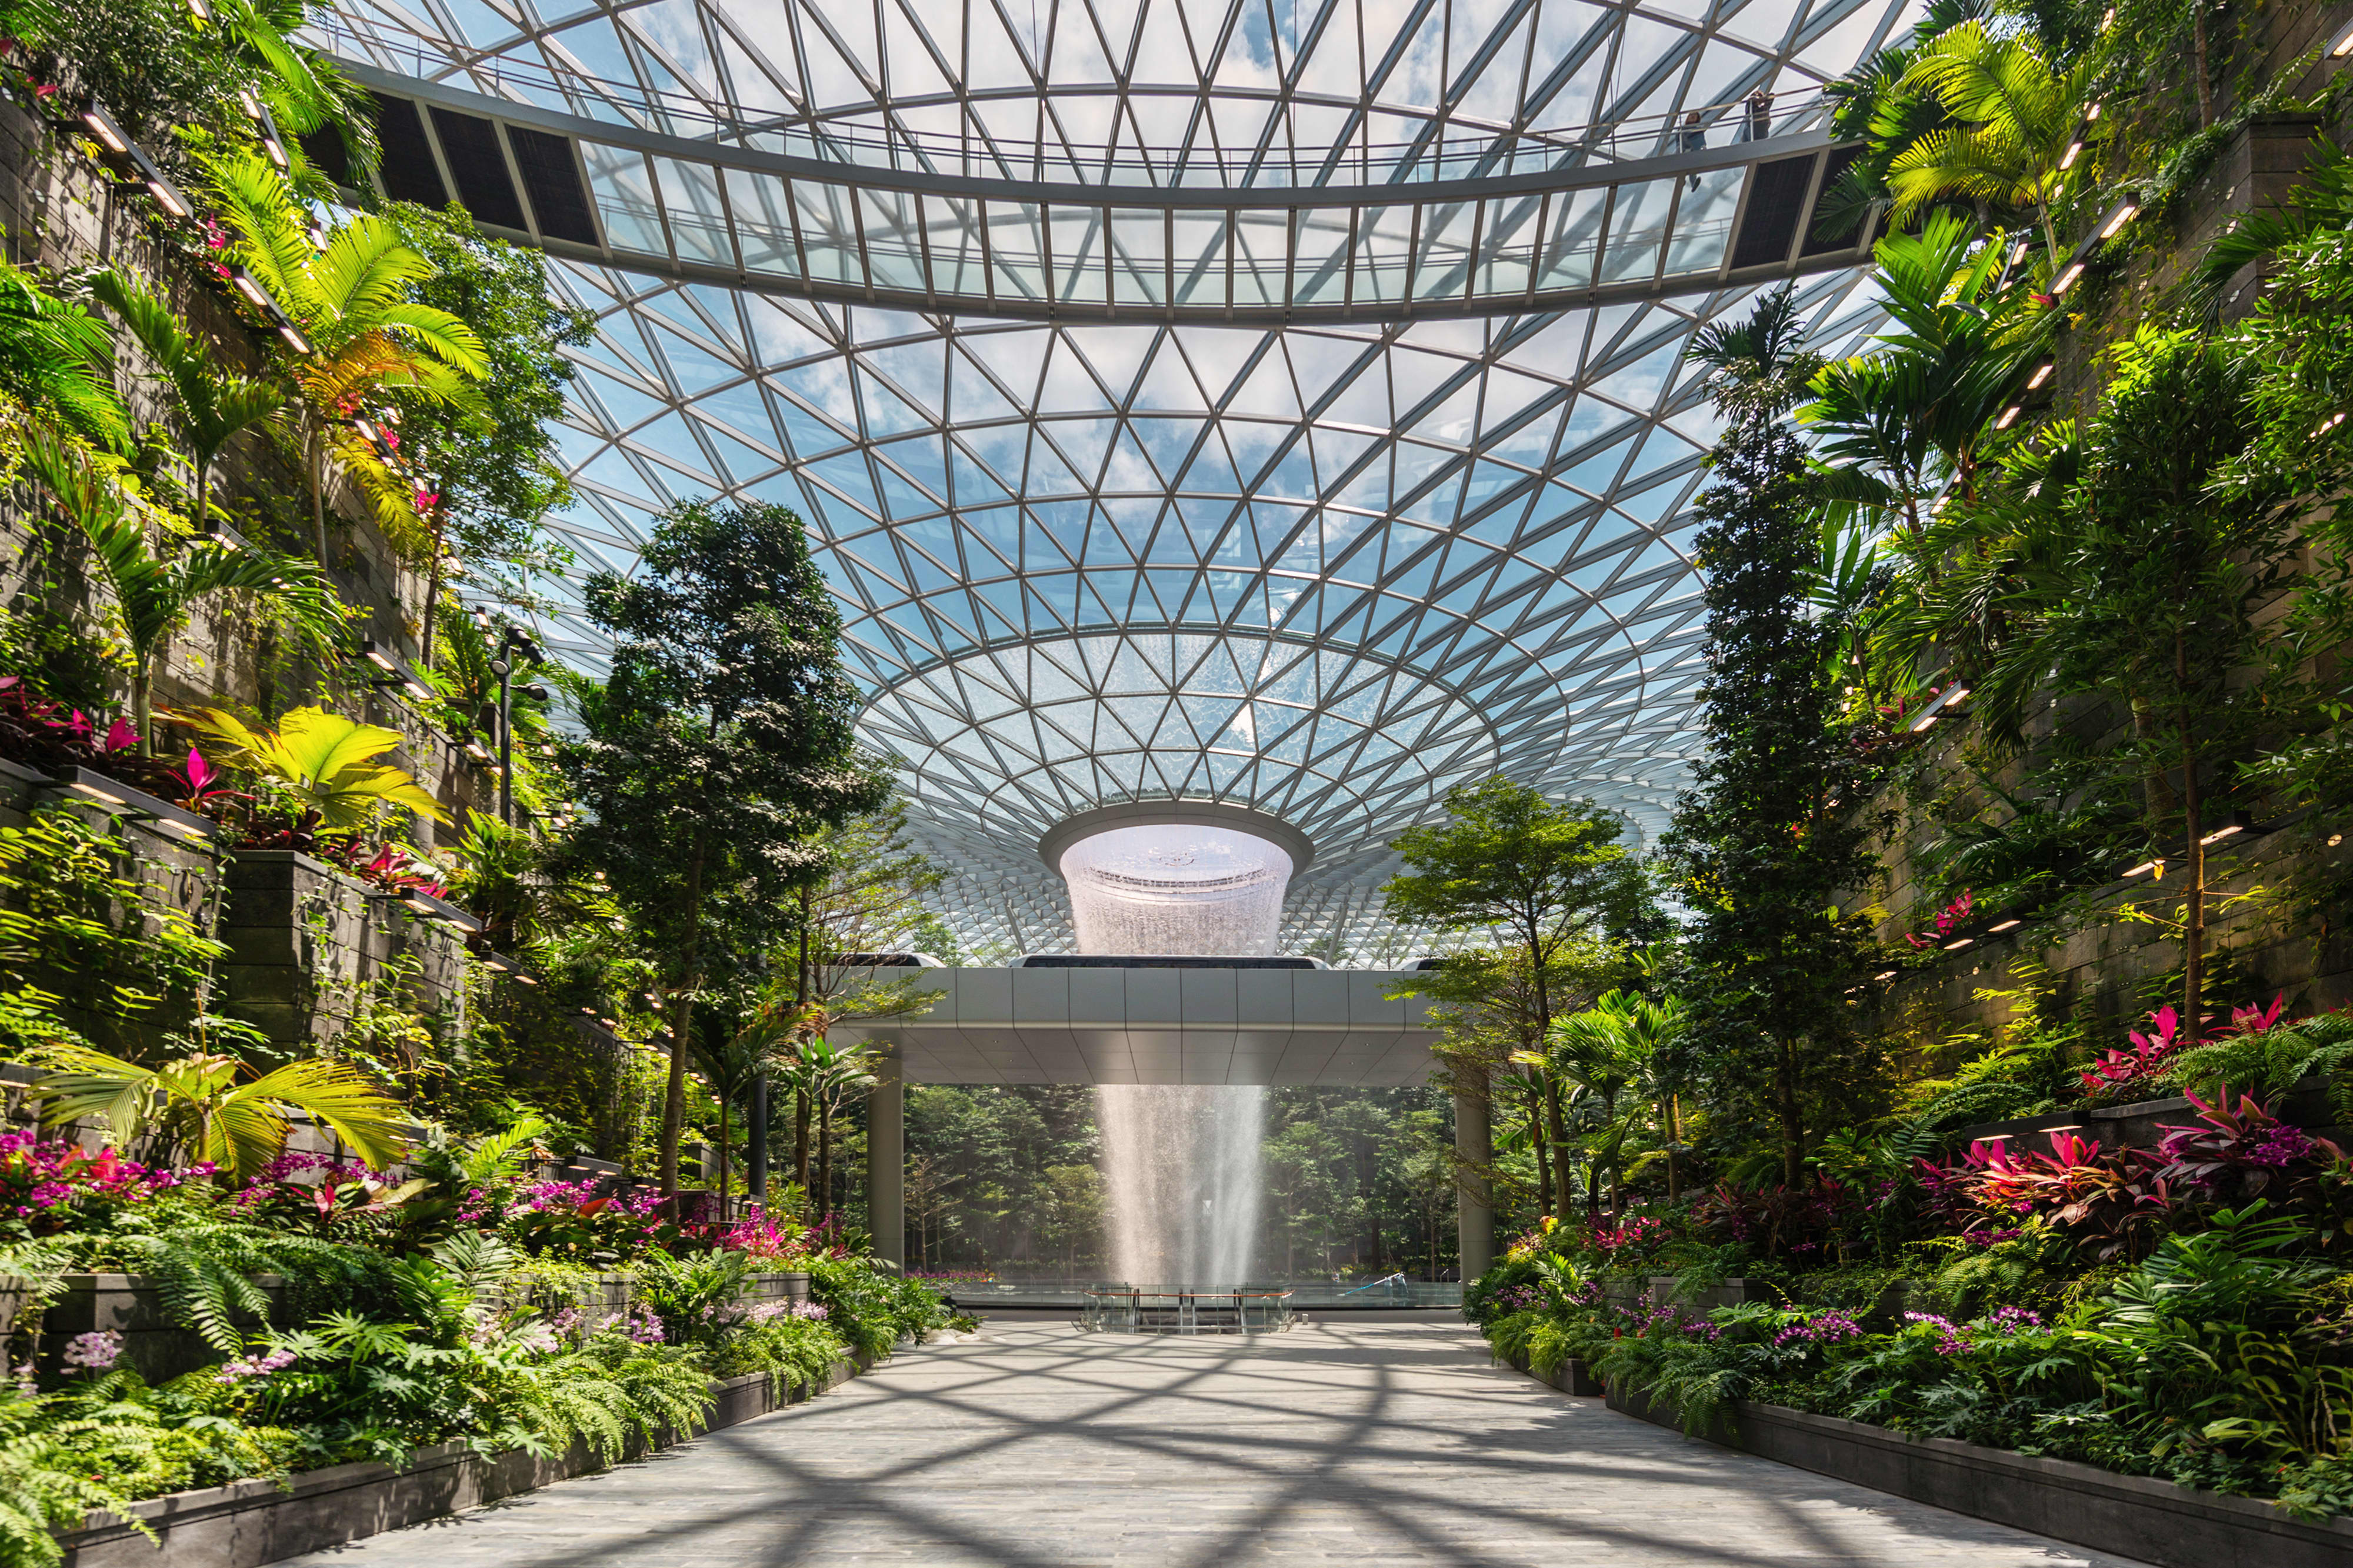 Singapore S Changi Airport Touts The World S Tallest Indoor Waterfall